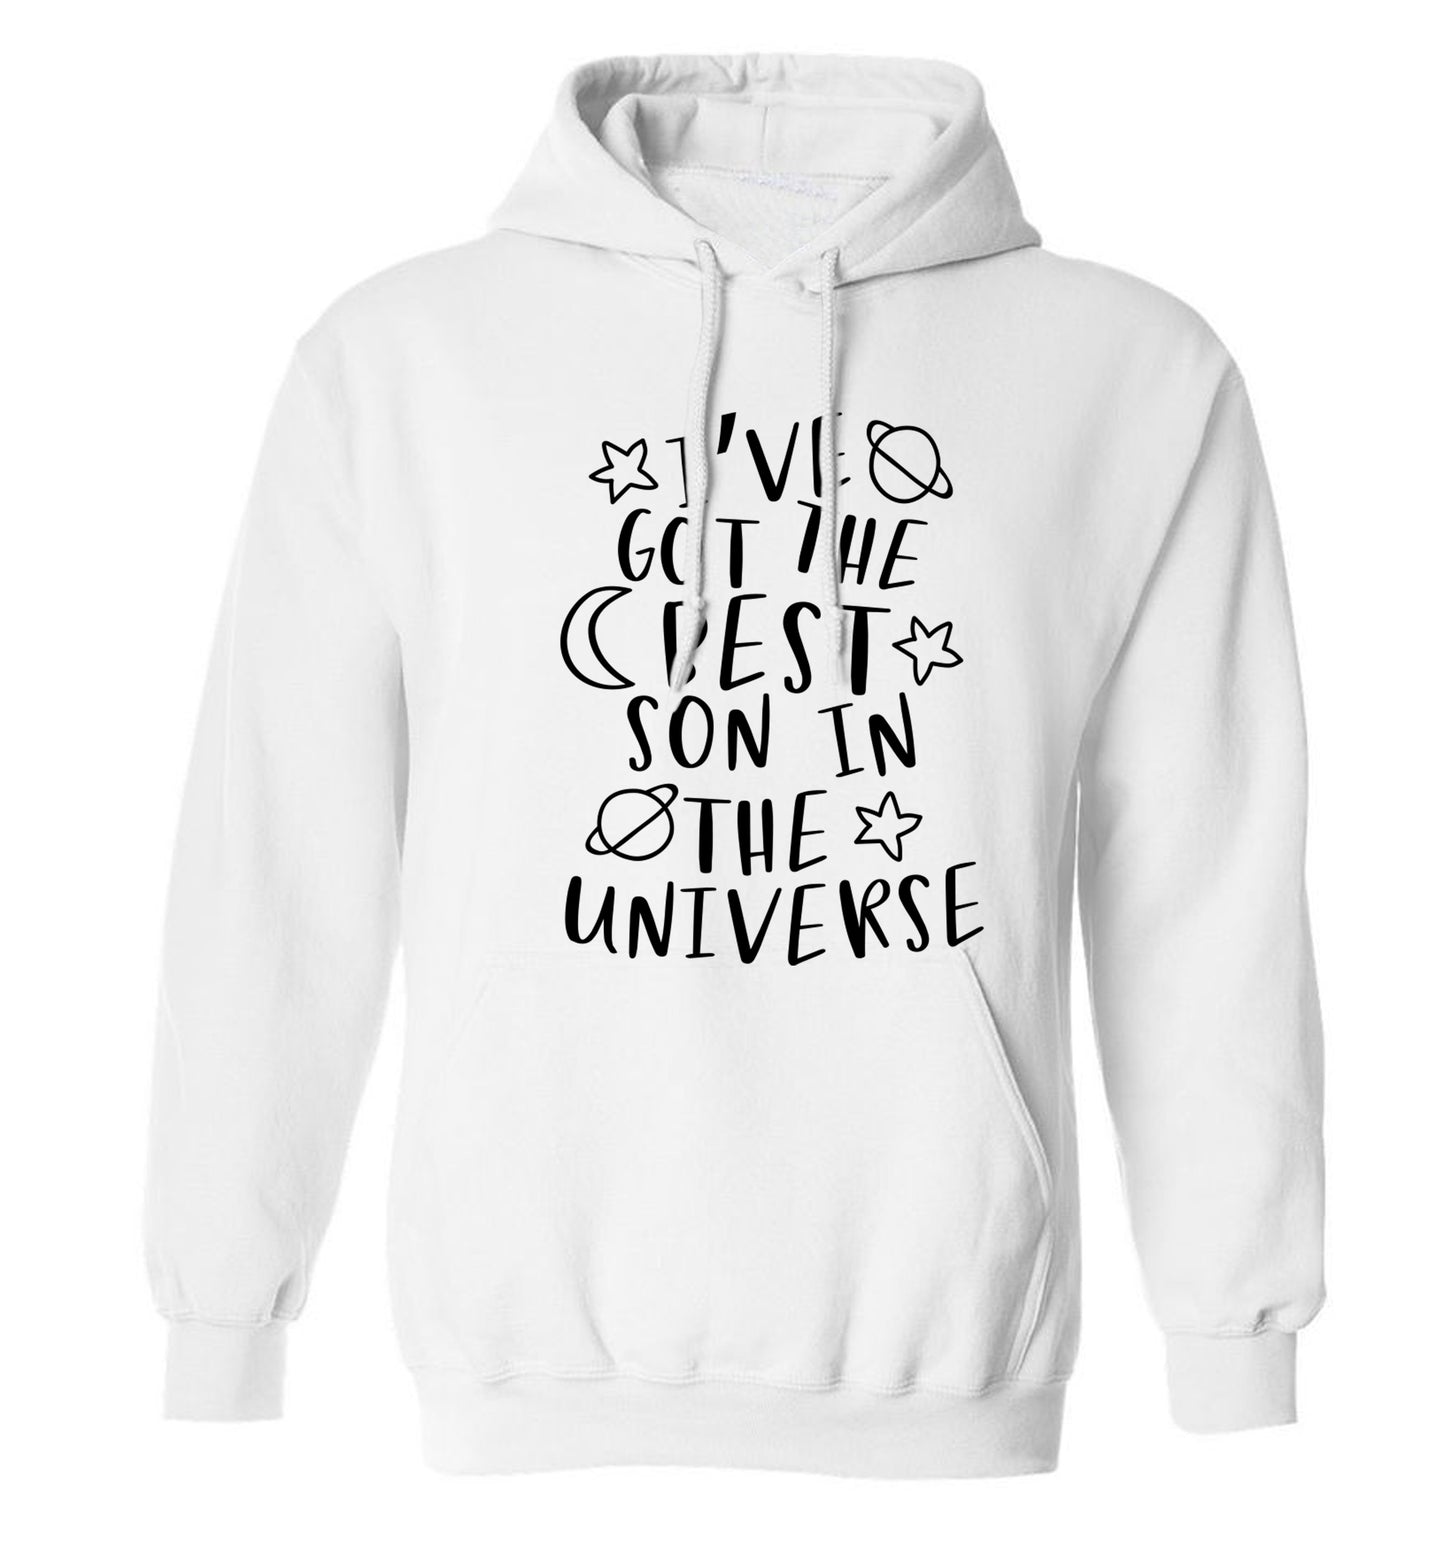 I've got the best son in the universe adults unisex white hoodie 2XL